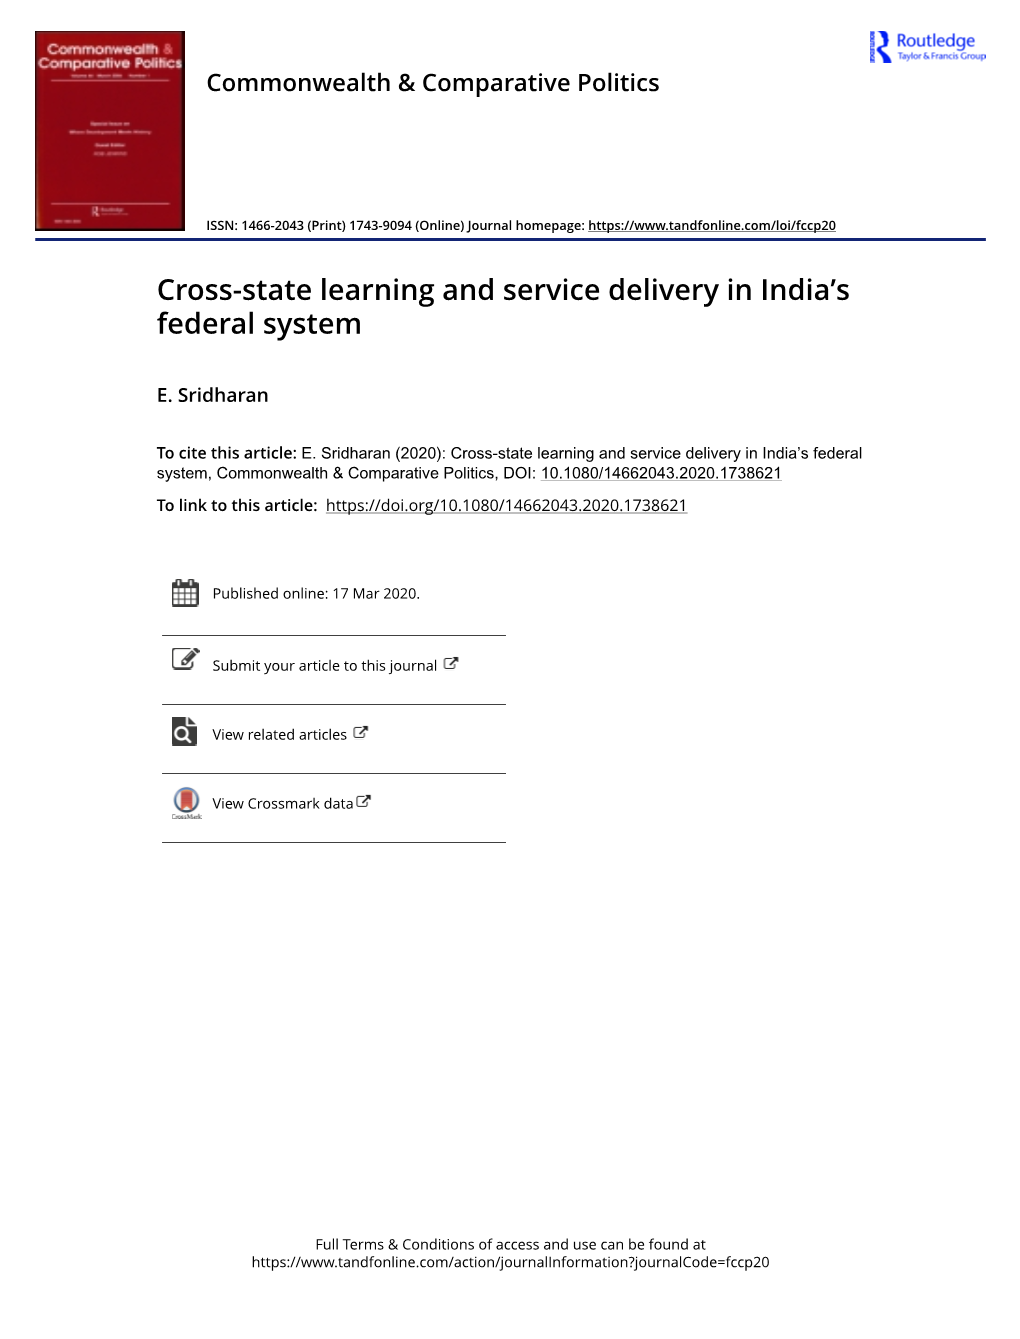 Cross-State Learning and Service Delivery in India's Federal System